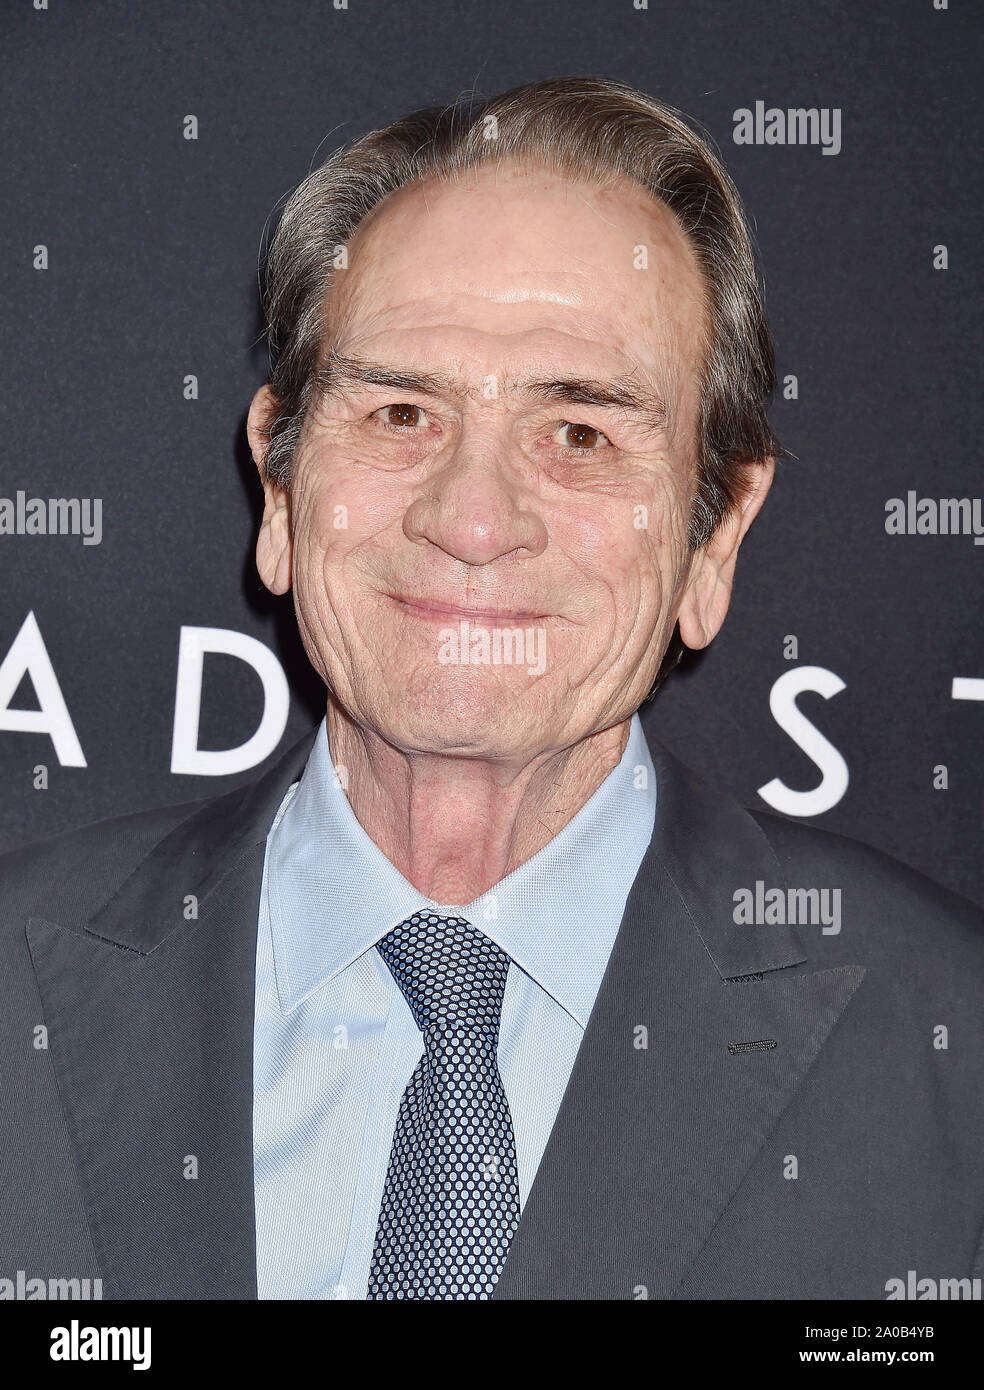 HOLLYWOOD, CA - SEPTEMBER 18: Tommy Lee Jones attends the premiere of 20th Century Fox's 'Ad Astra' at The Cinerama Dome on September 18, 2019 in Los Angeles, California. Stock Photo